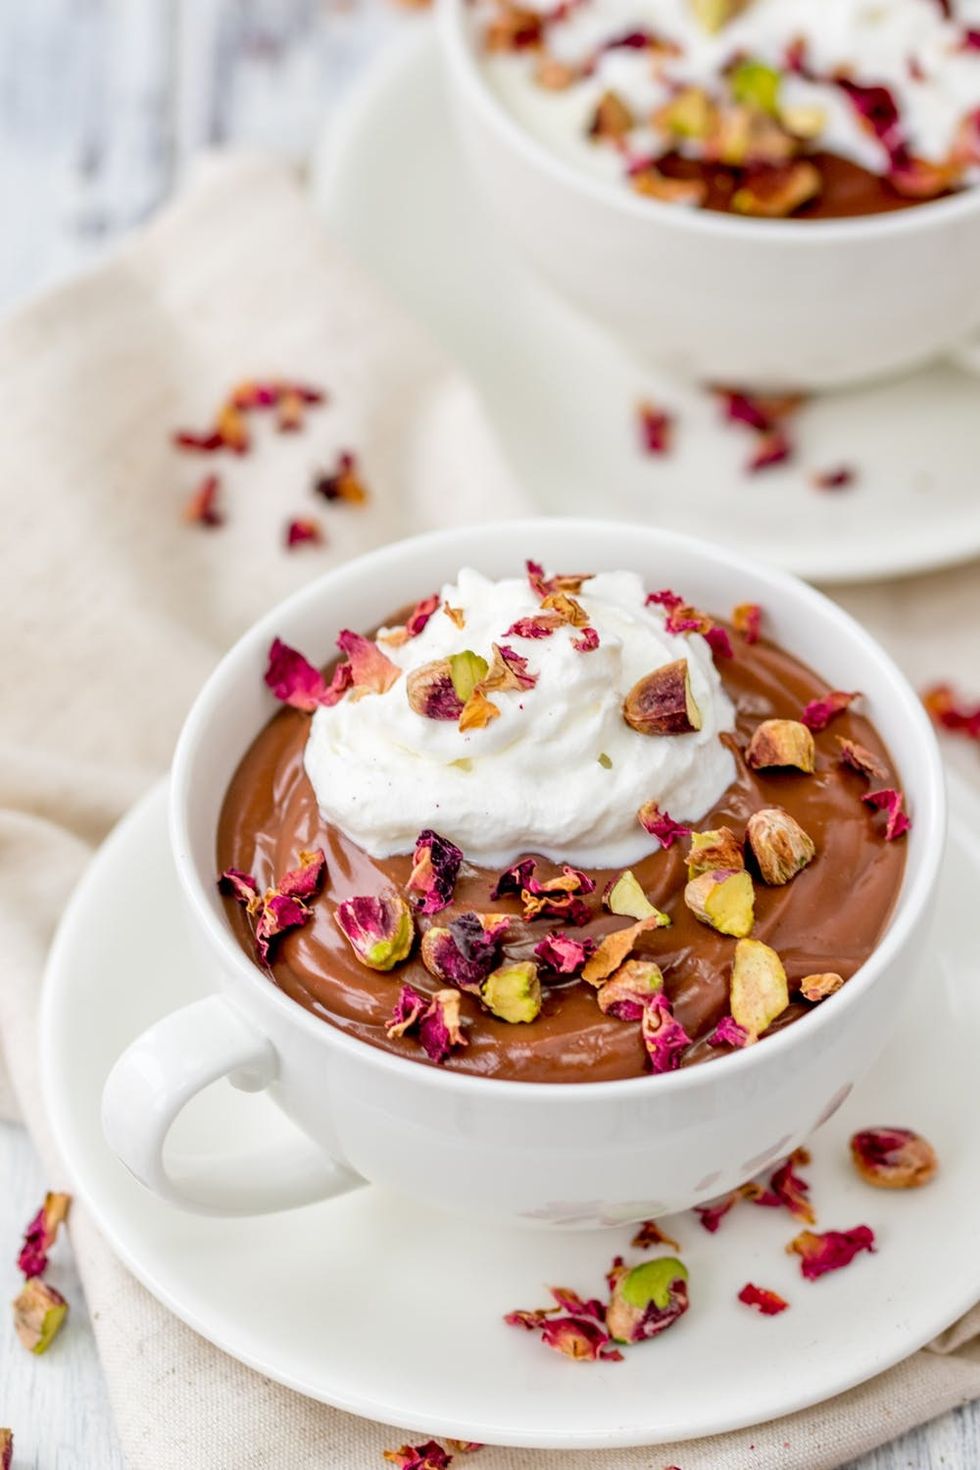 We're Going Nuts For National Pistachio Day With This Rose And Pistachio Hot Chocolate!